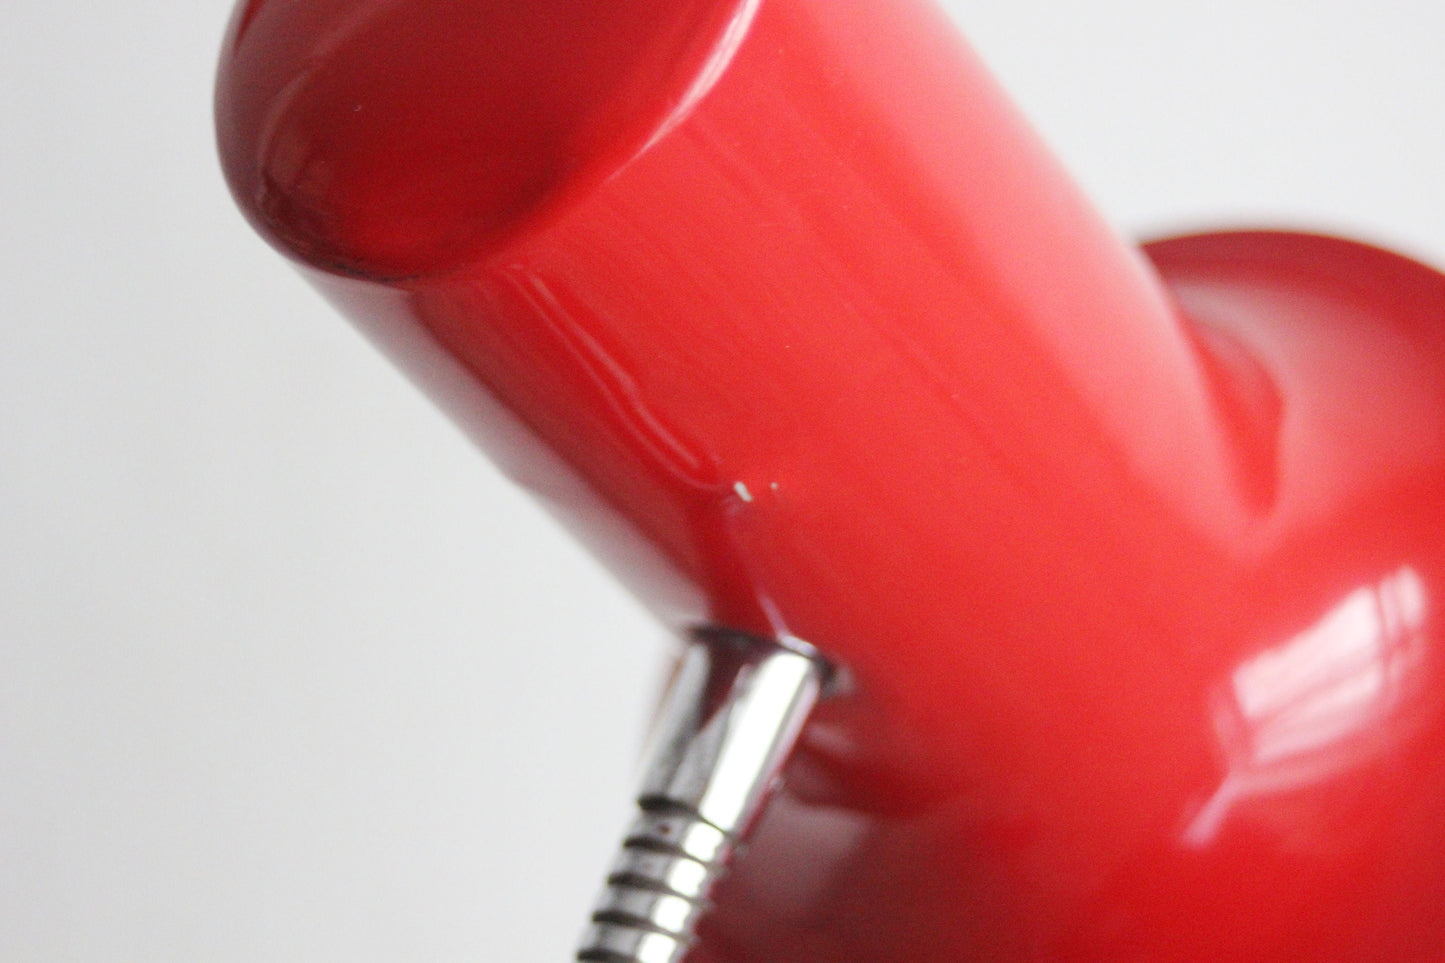 Vintage red summer of love 60s gooseneck desk lamp. Space age table lamp.